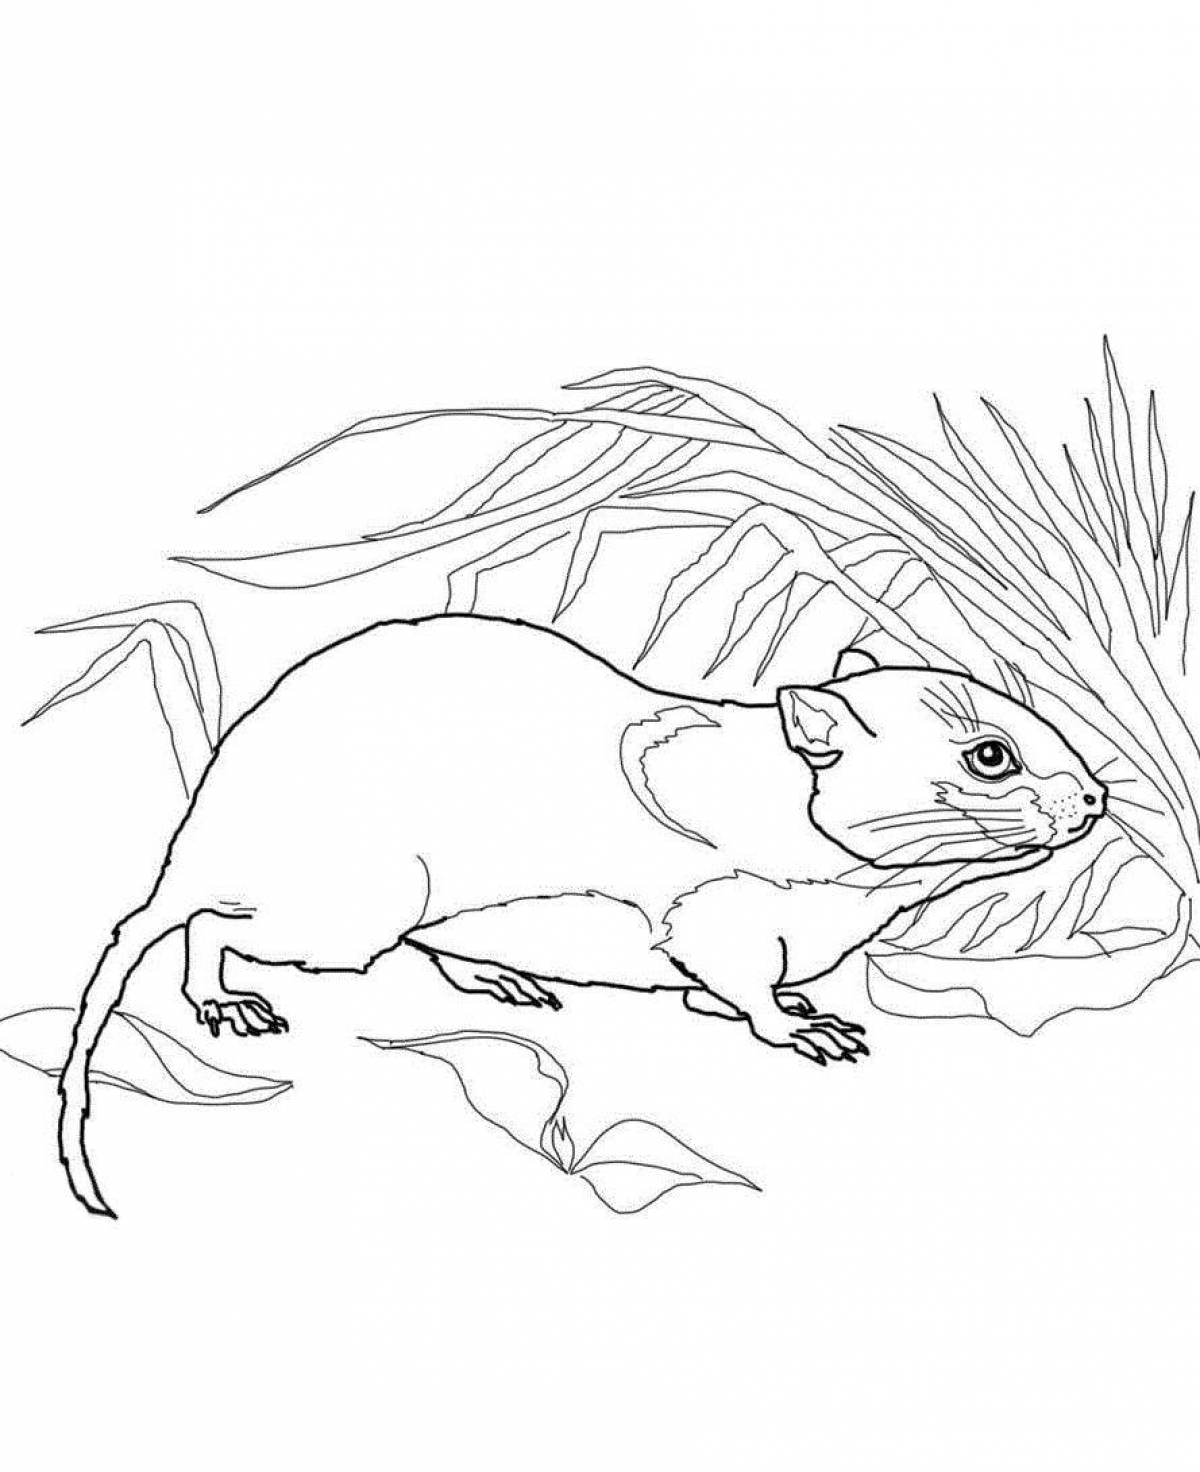 Naughty vole mouse coloring book